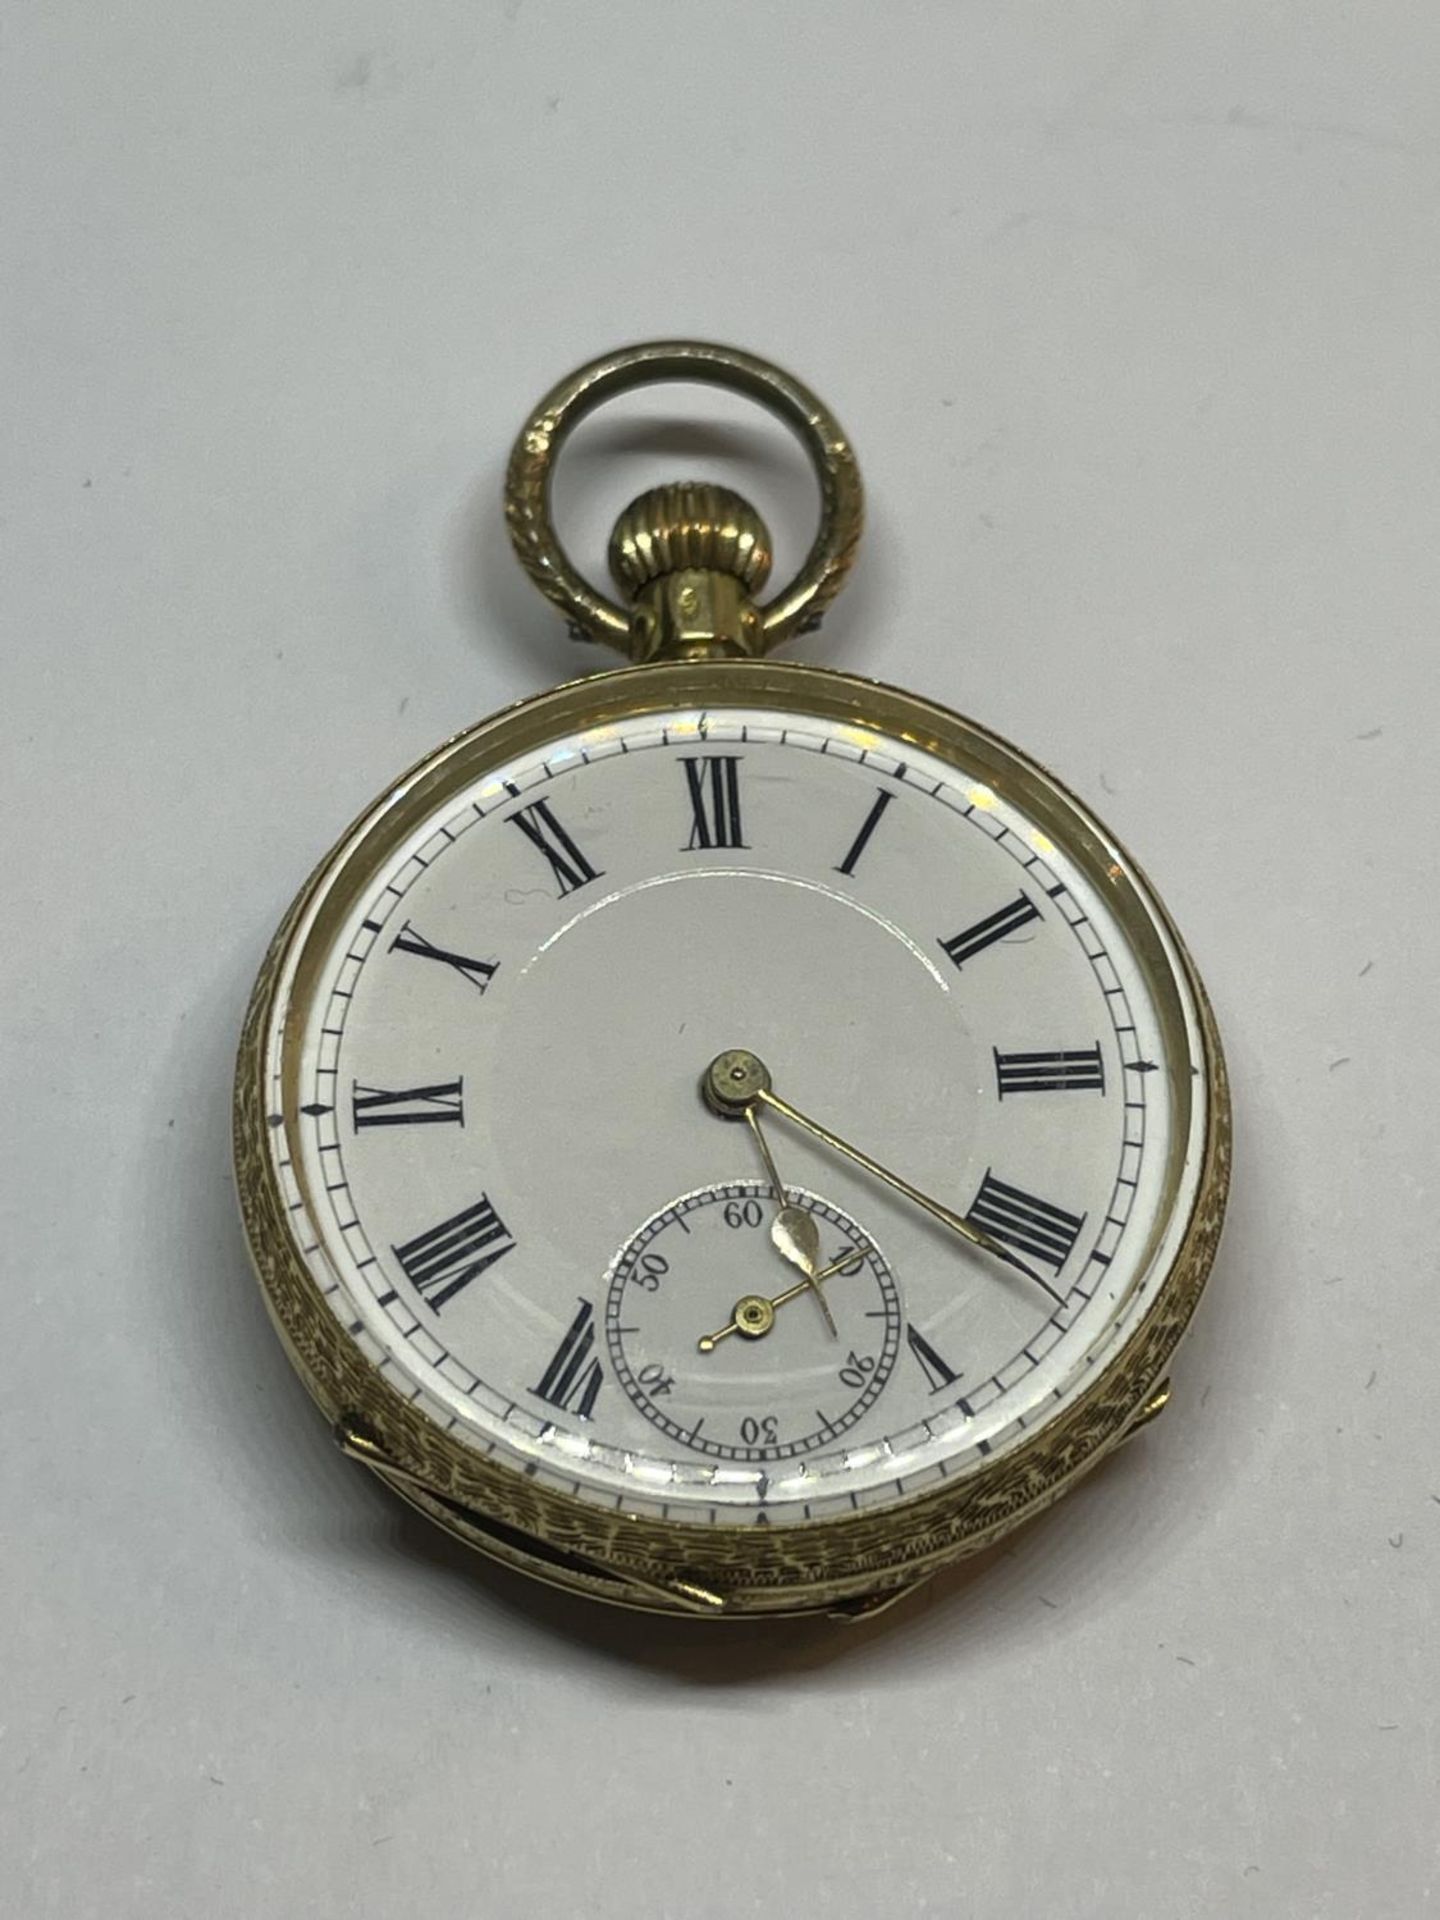 AN 18CT GOLD TOP WIND POCKET WATCH WITH WHITE ENAMELLED DIAL AND GOLD HANDS, WITH ORIGINAL BOX - Image 3 of 7